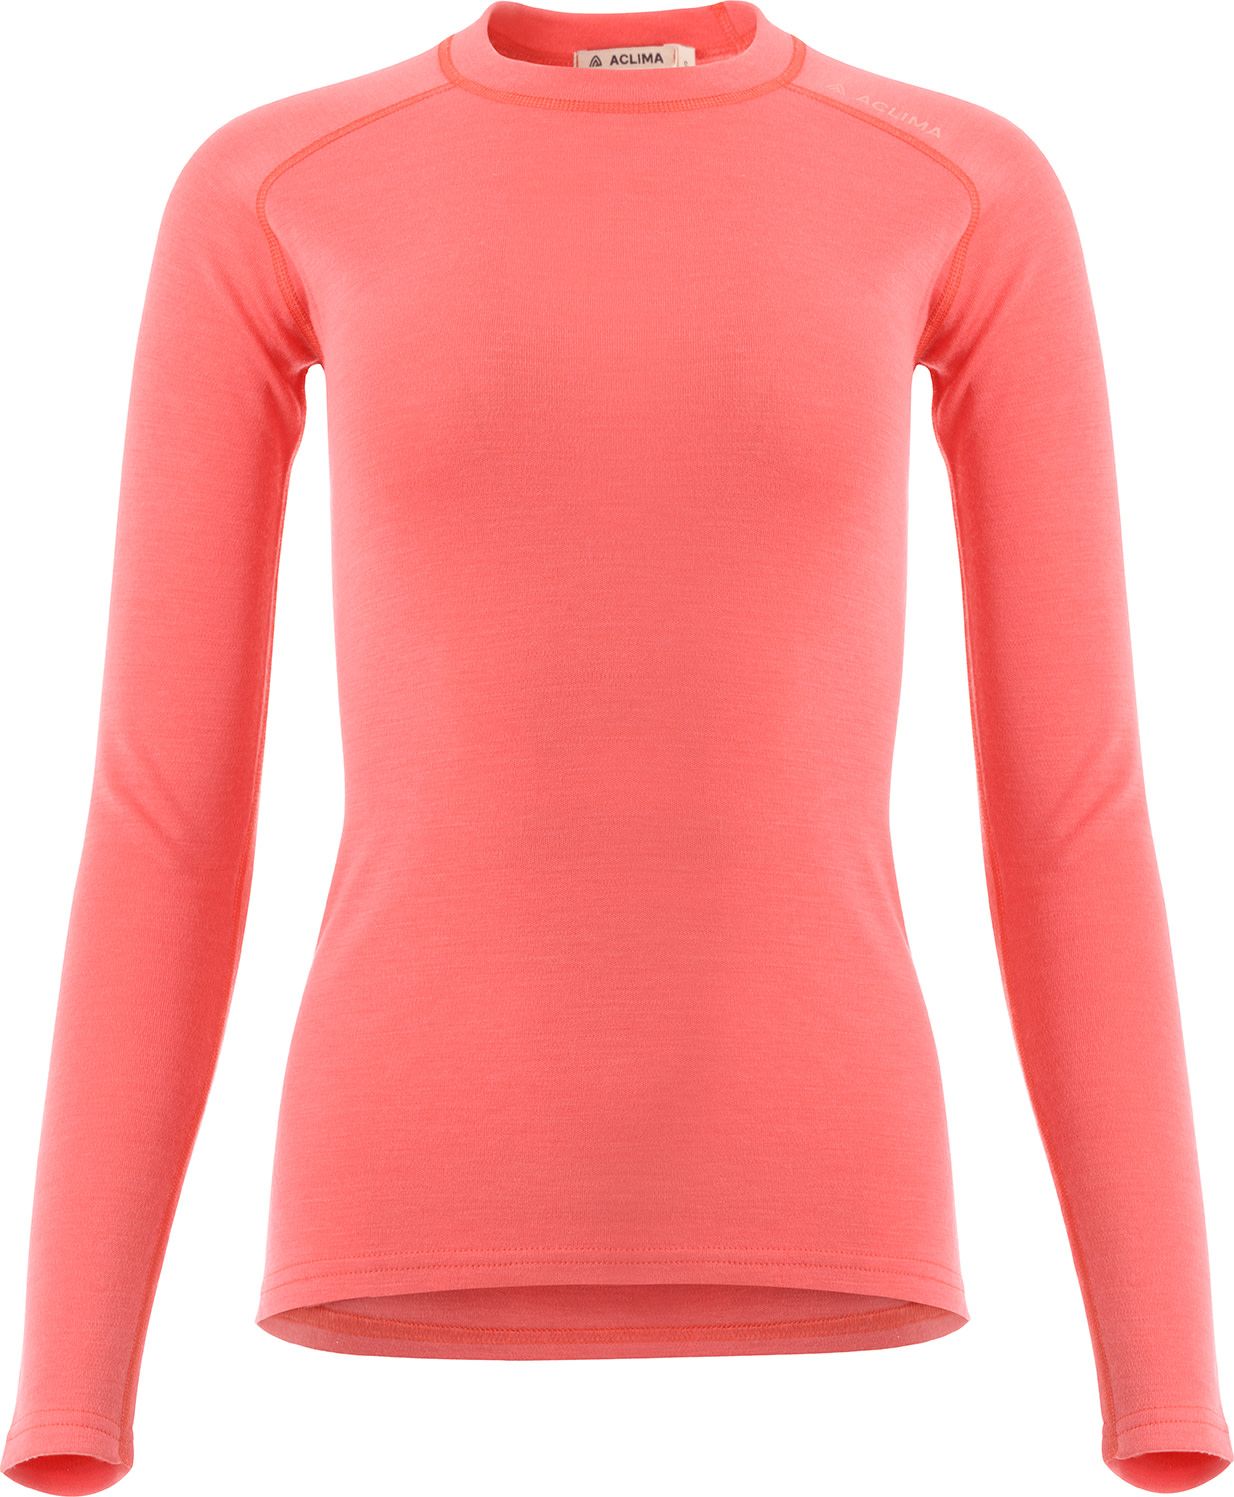 Women's WarmWool Crewneck Spiced Coral